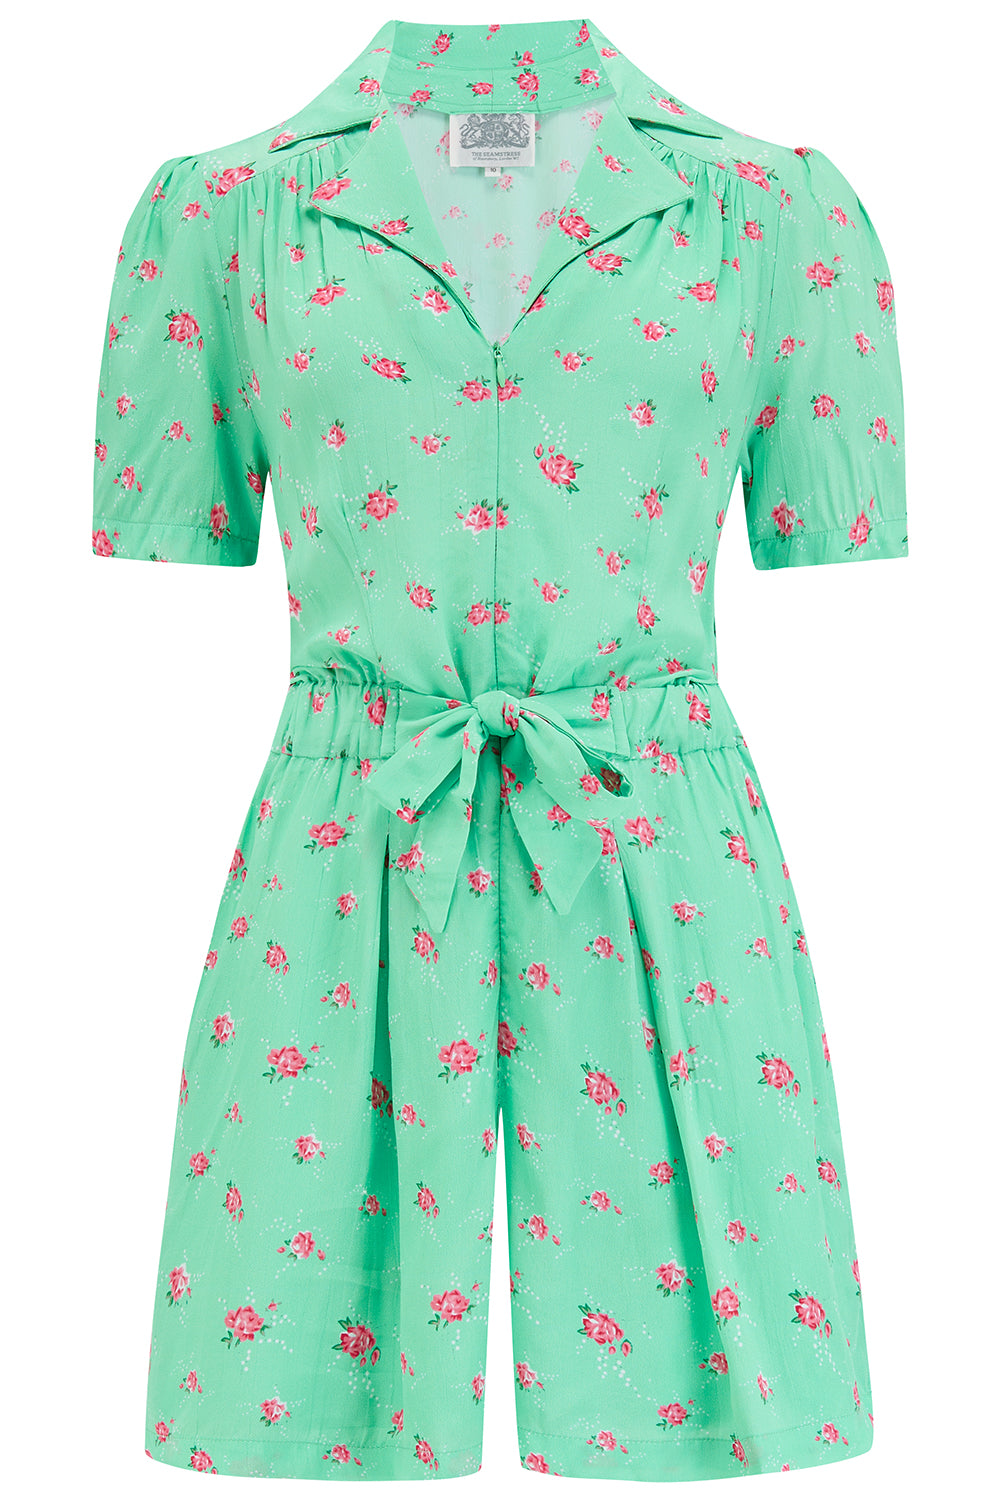 Emma Playsuit In Mint Rose Print by The Seamstress of Bloomsbury, Classic 1940s Vintage Style